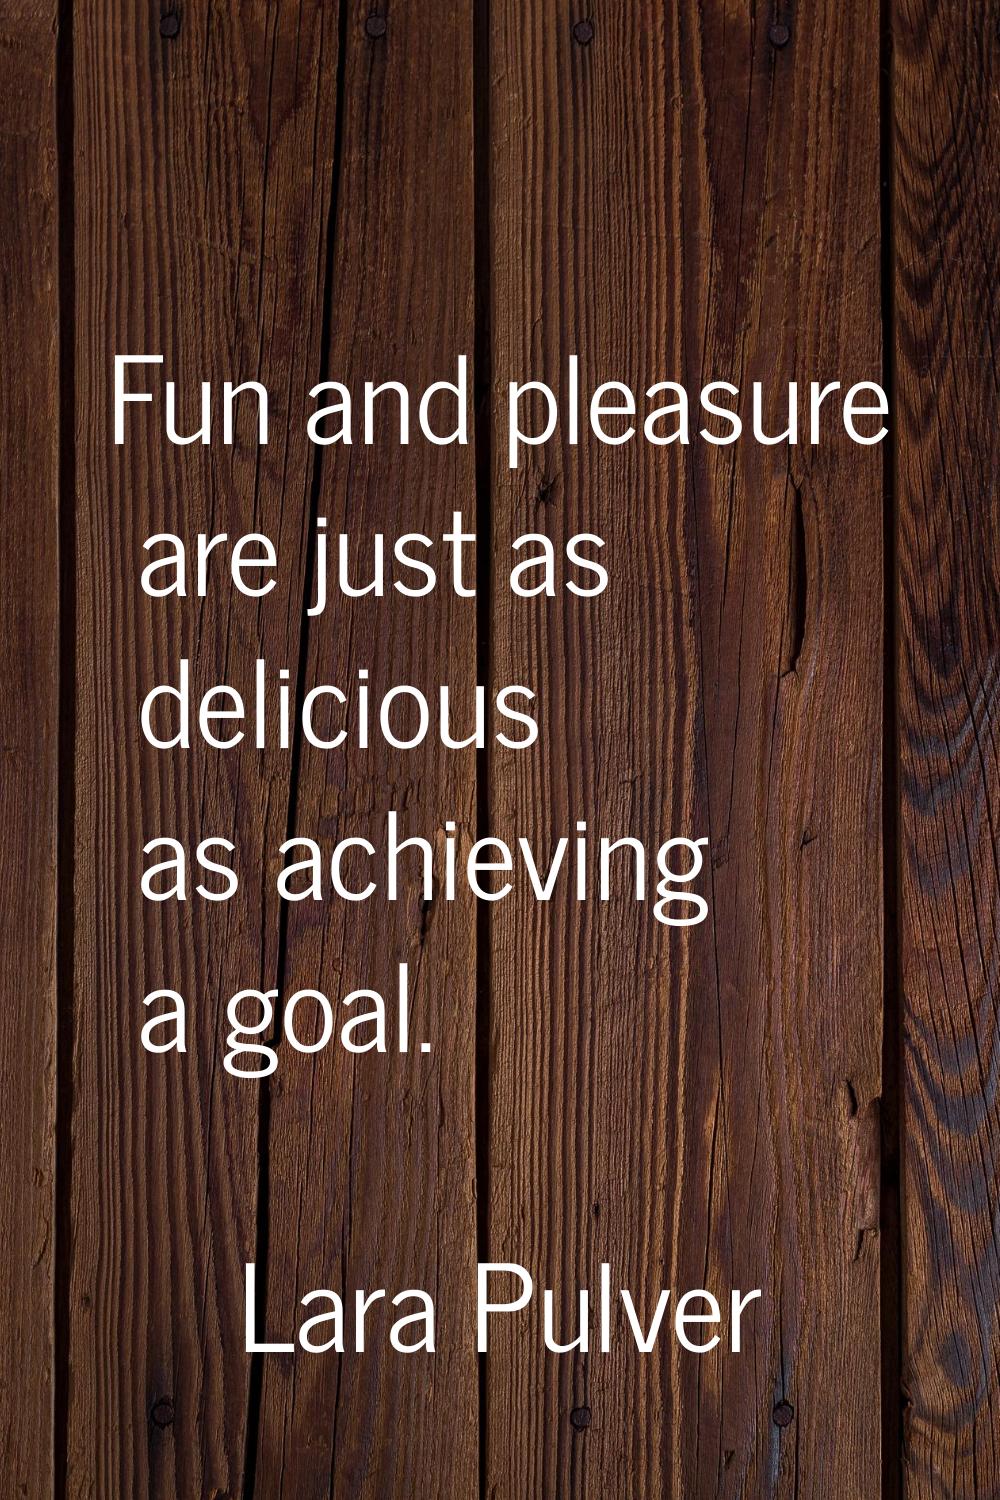 Fun and pleasure are just as delicious as achieving a goal.